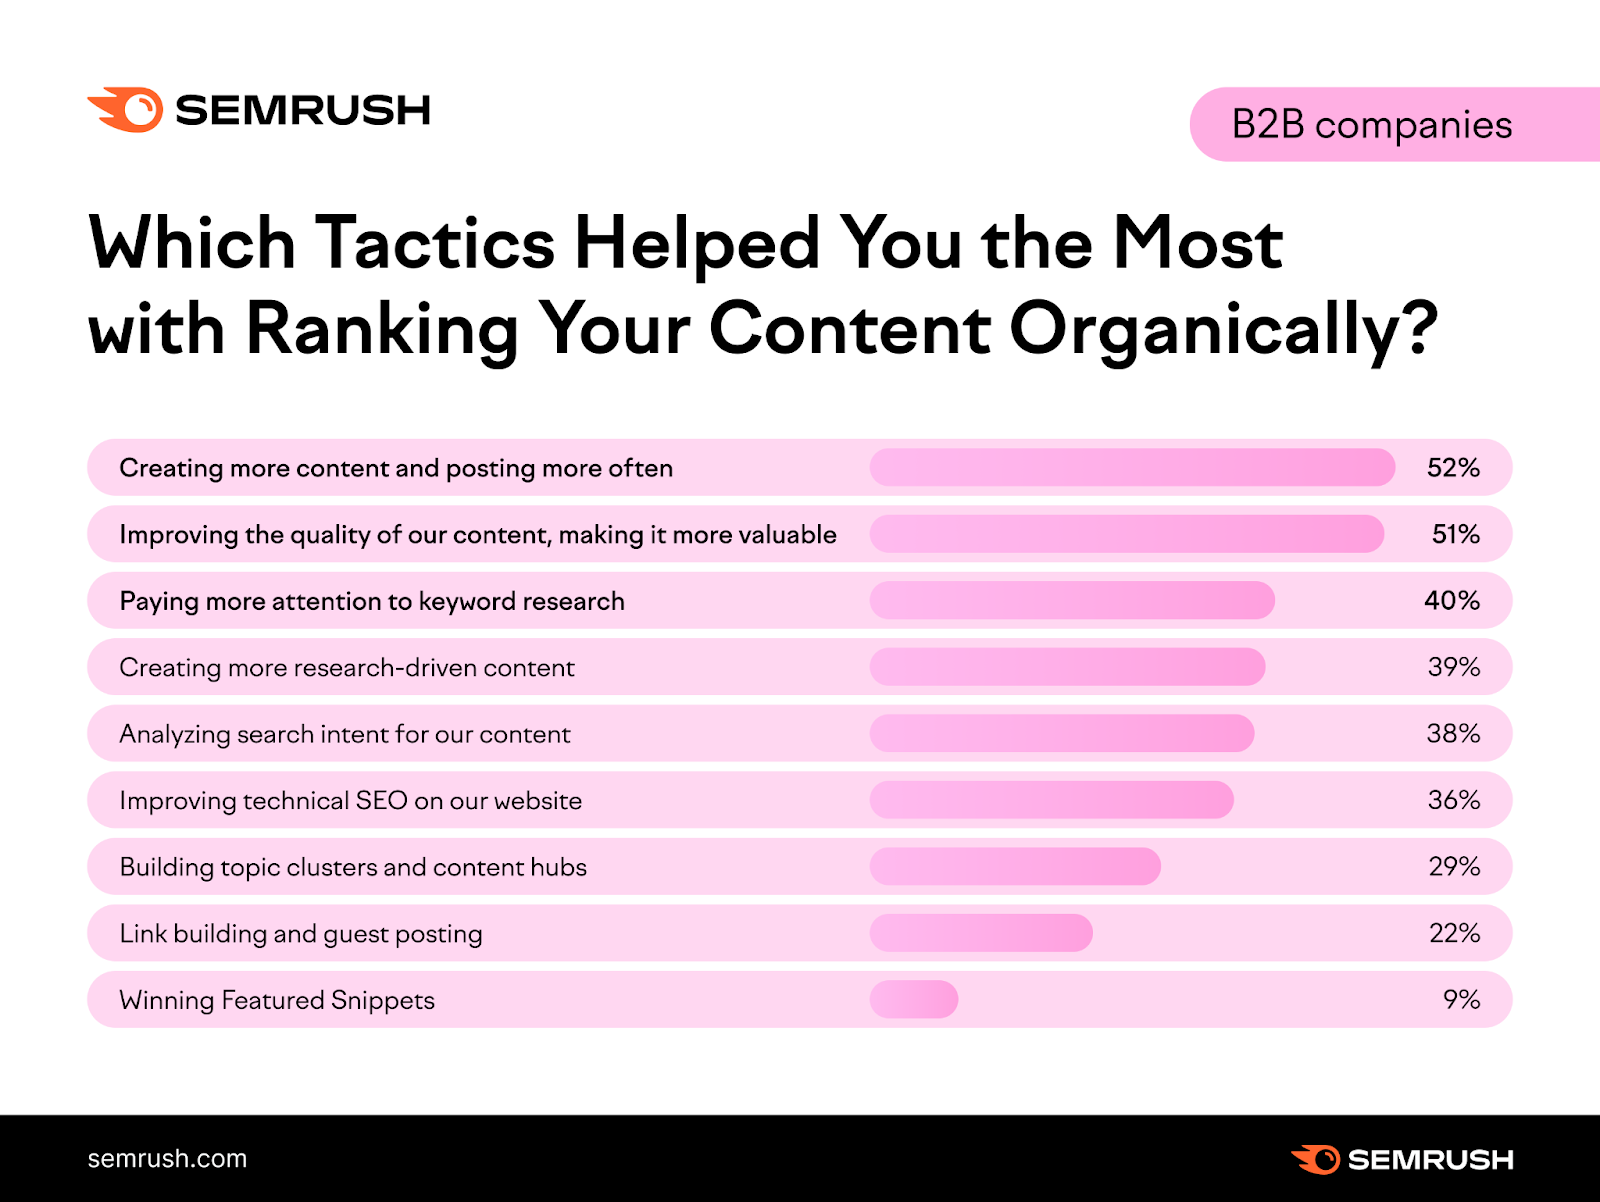 Content ranking tactics for B2B companies in 2023